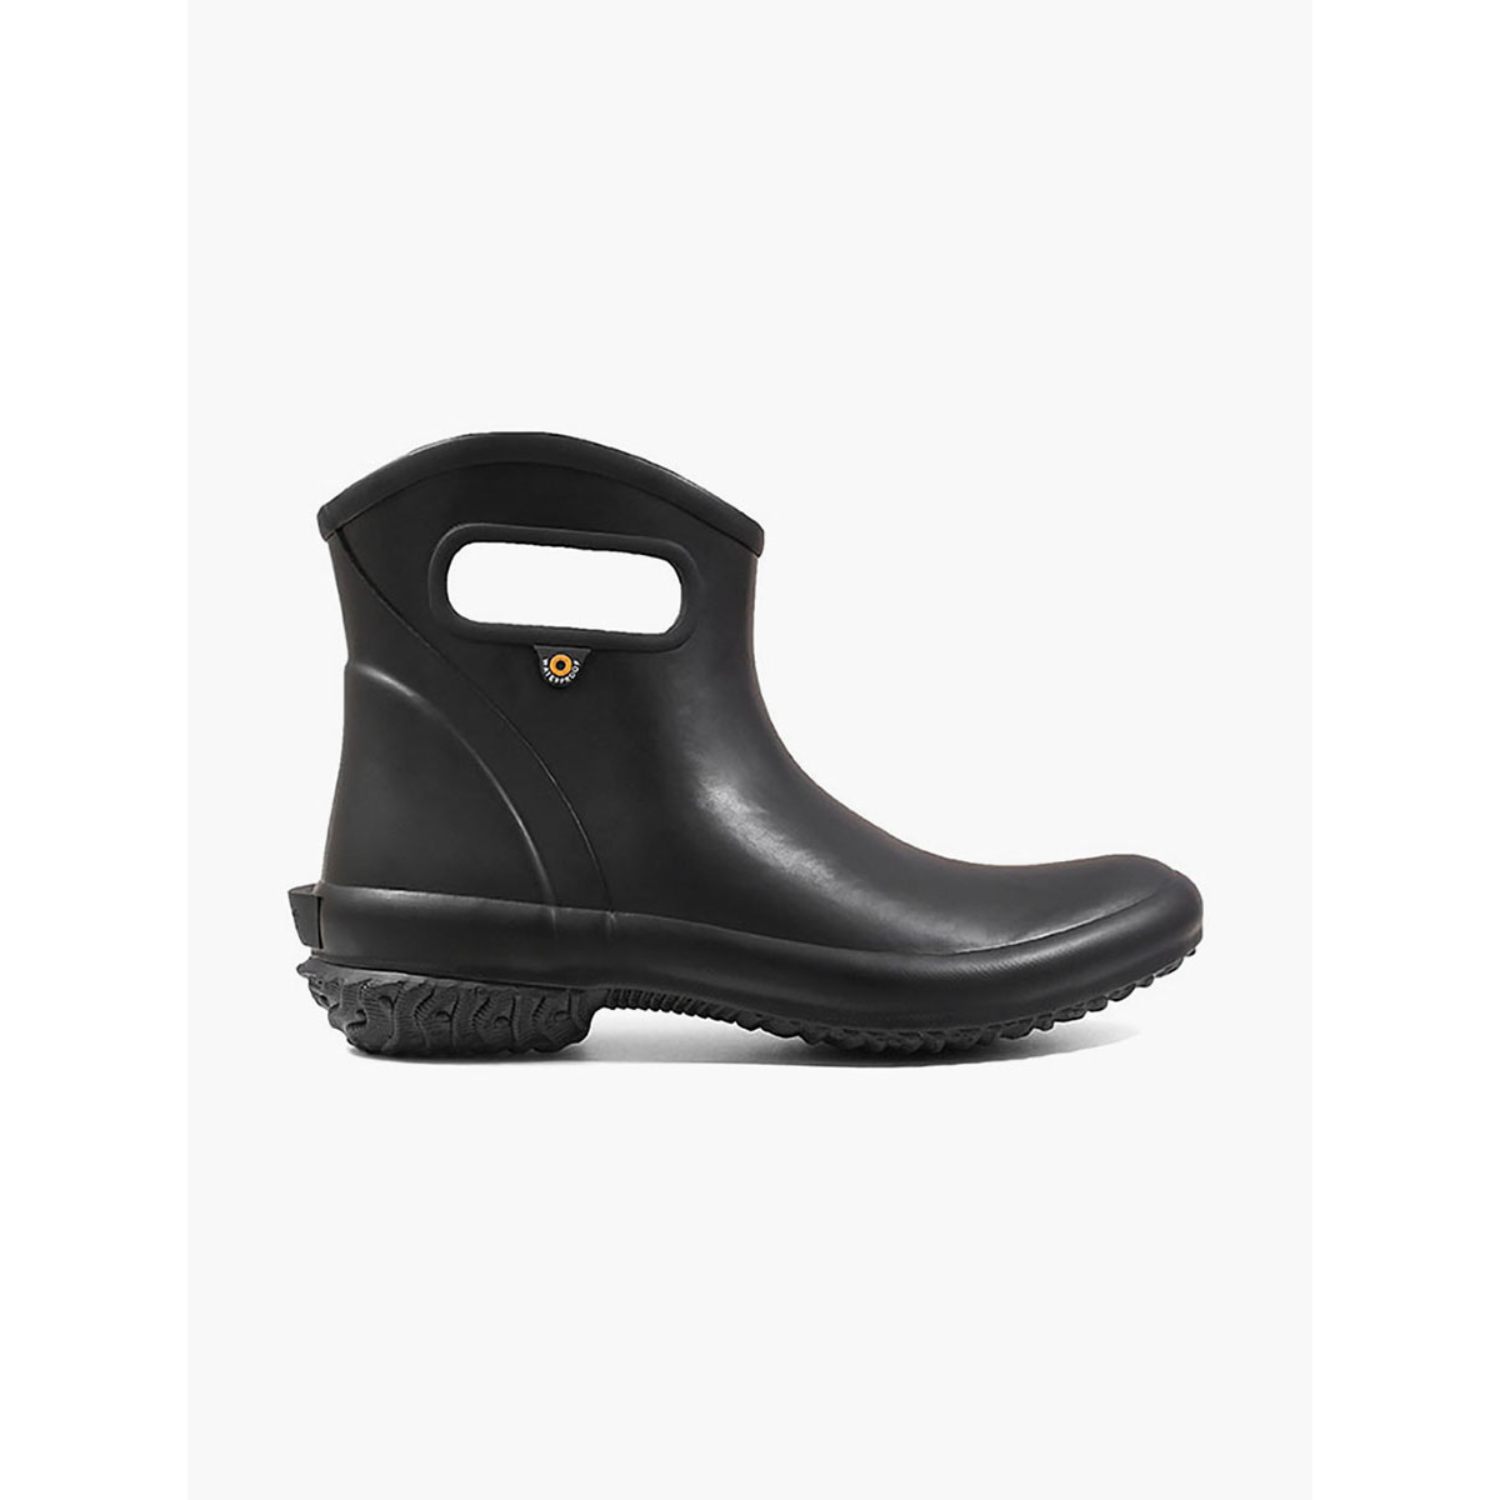 Bogs Patch Ankle Gumboots